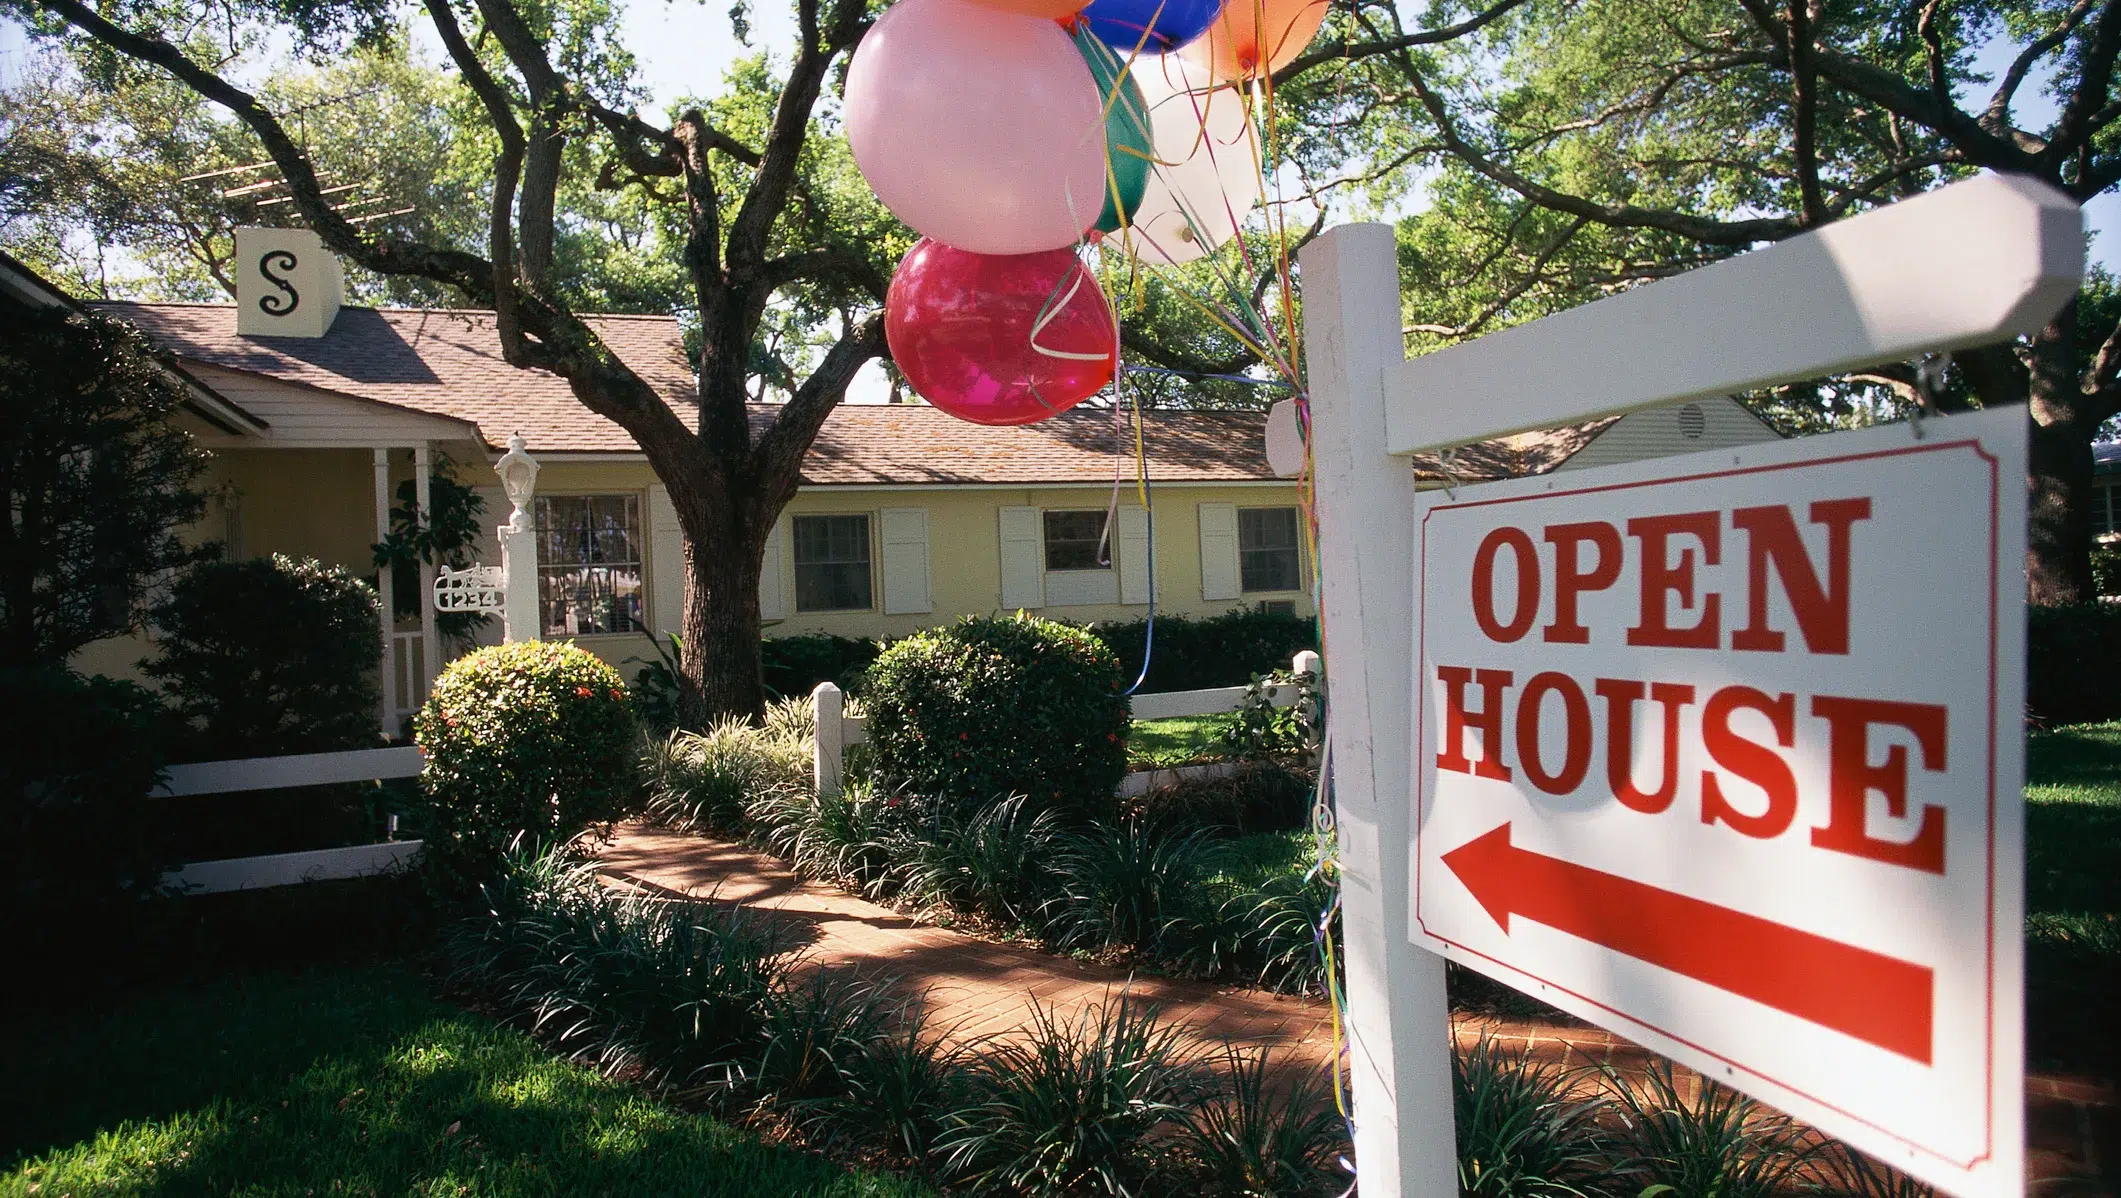 How to Ask an Agent to Hold an Open House